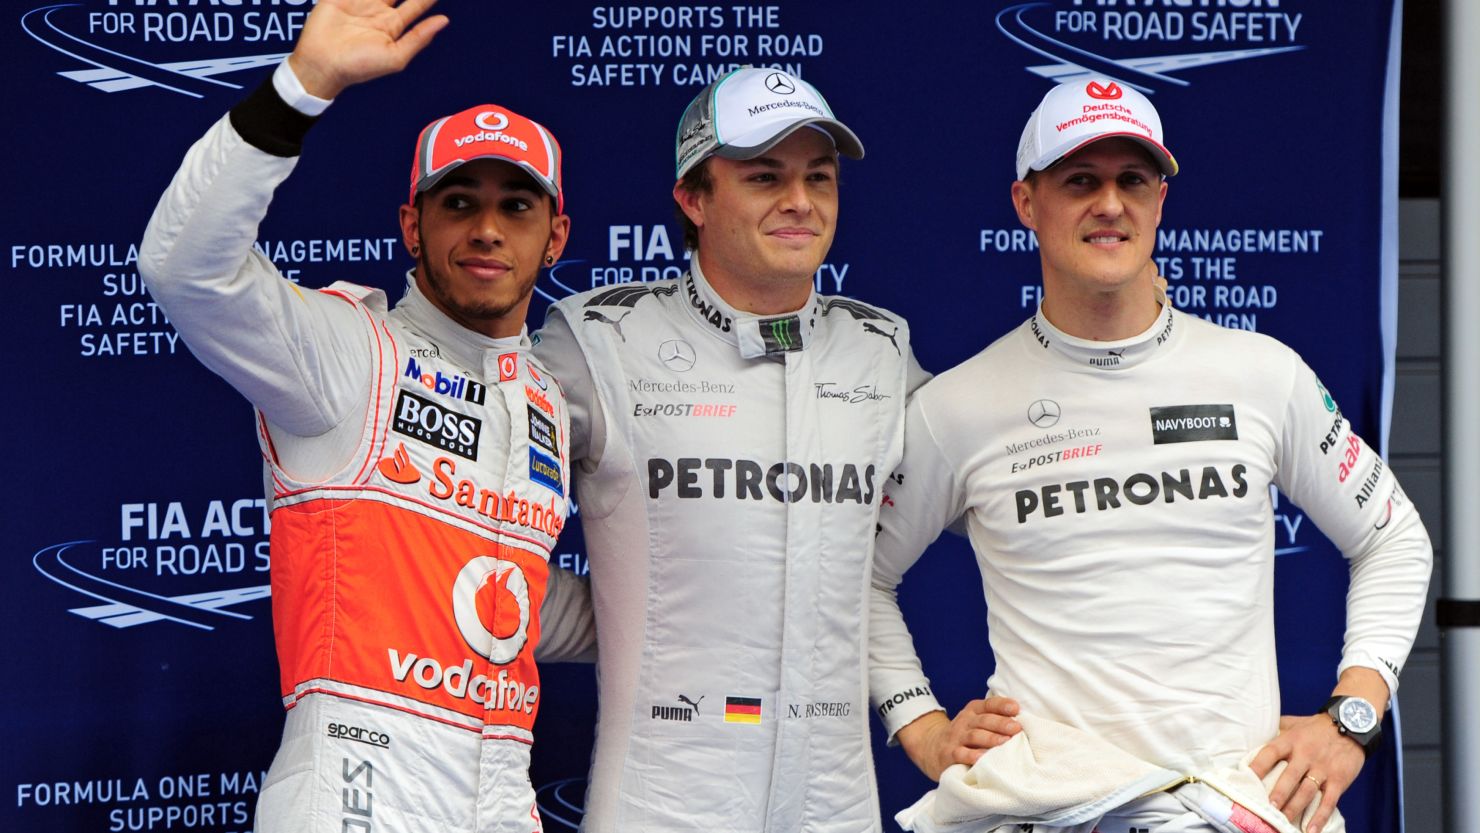 Nico Rosberg (center) flanked by Lewis Hamilton and Michael Schumacher after the qualifying session at the Chinese Grand Prix 